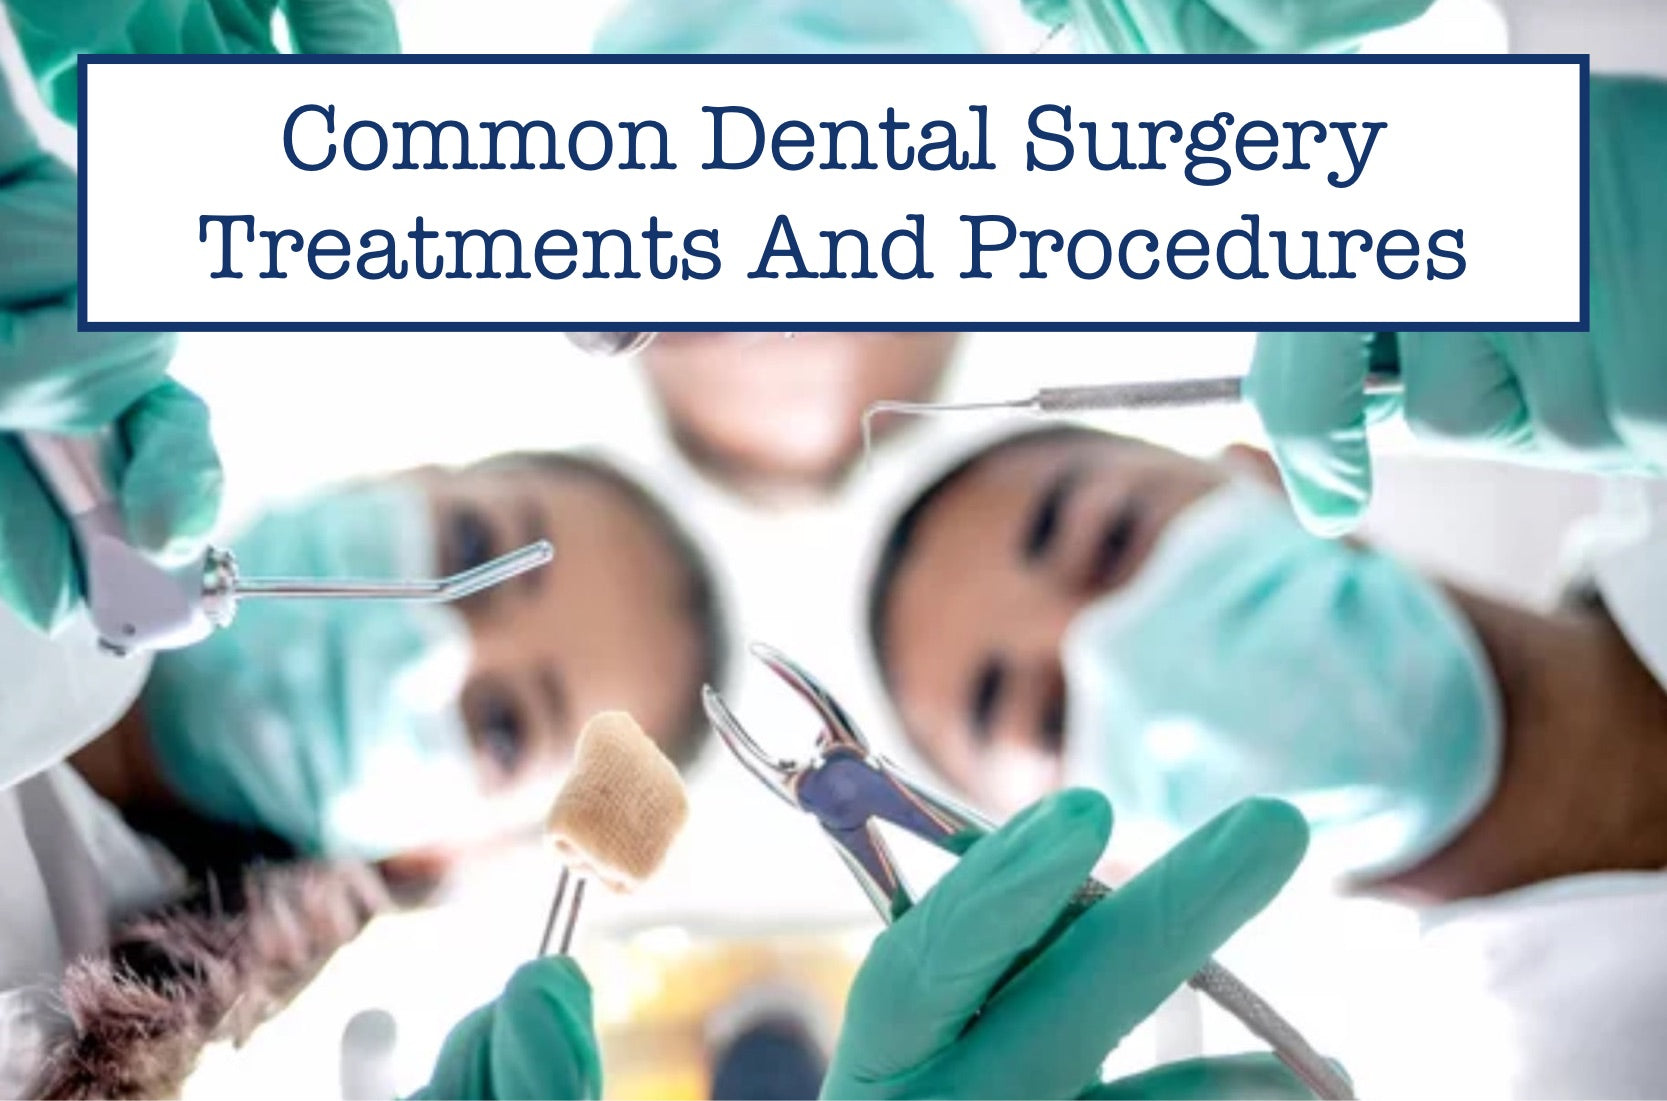 Common Dental Surgery Treatments And Procedures